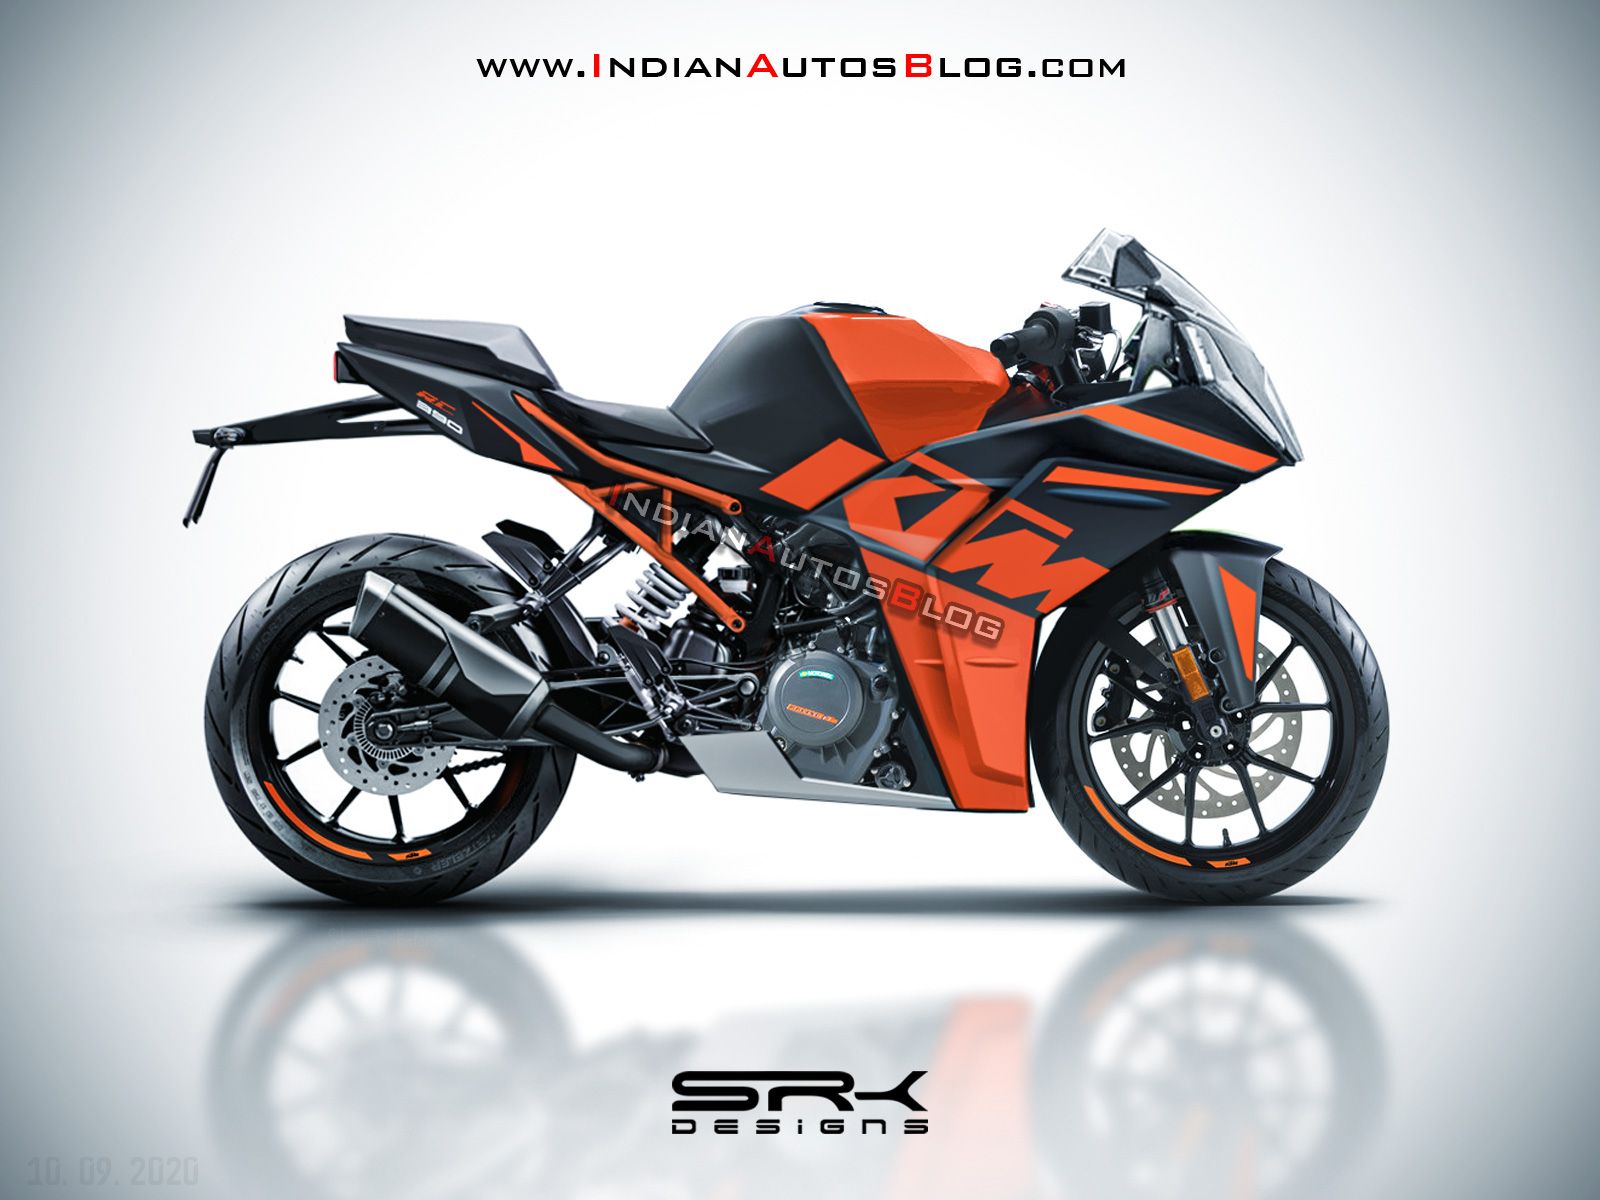 Here's how the 2021 KTM RC 390 could look like